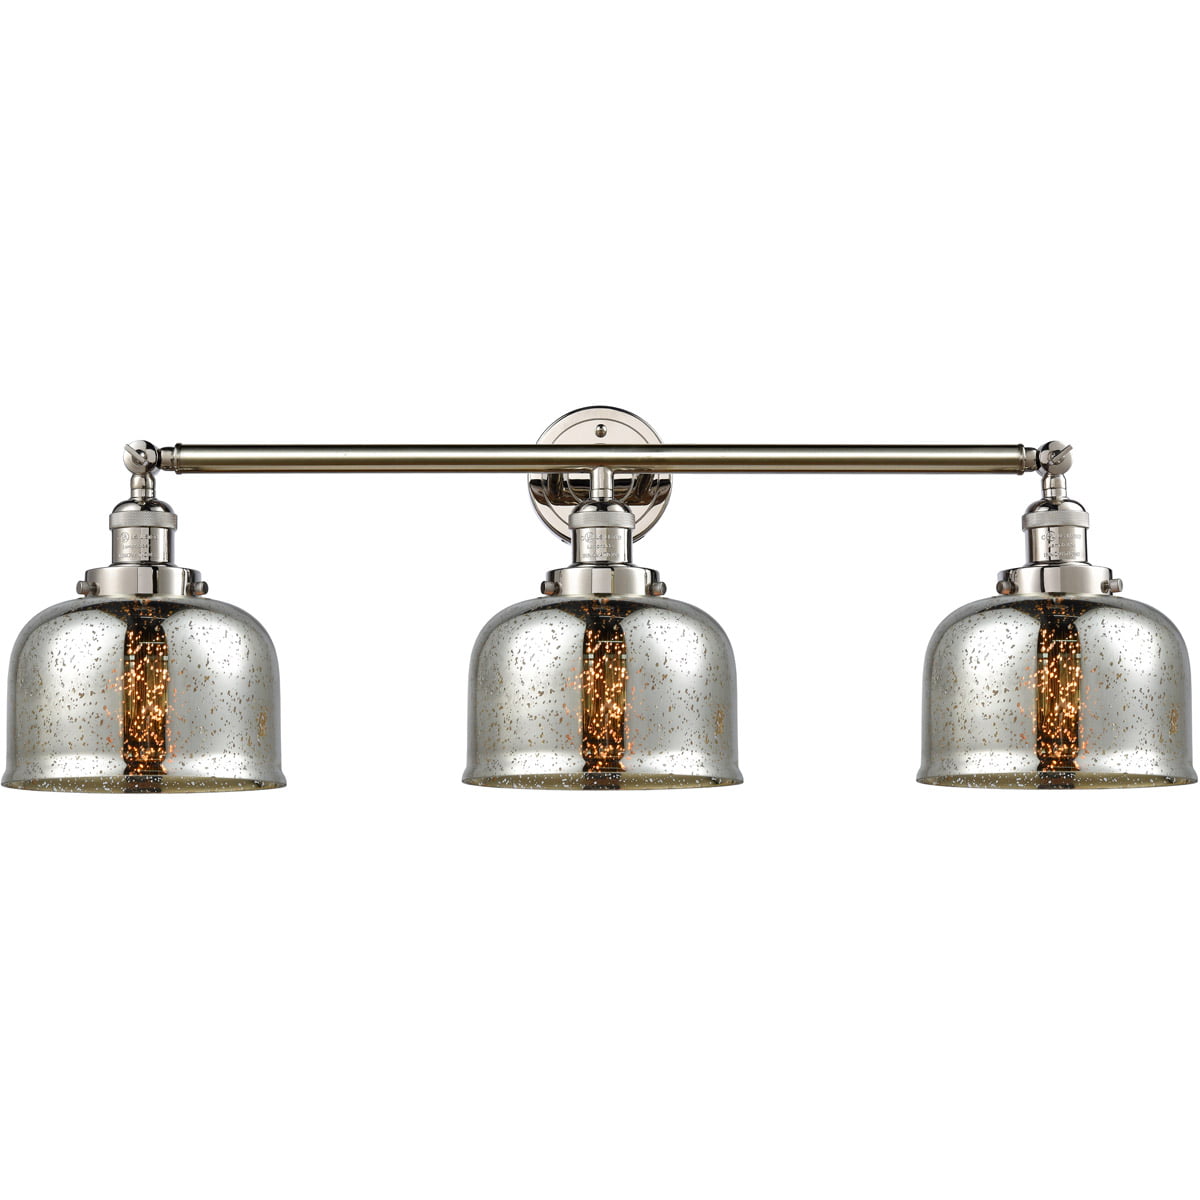 Bathroom Vanity 3 Light Fixtures With Polished Nickel Finish Cast Brass ...